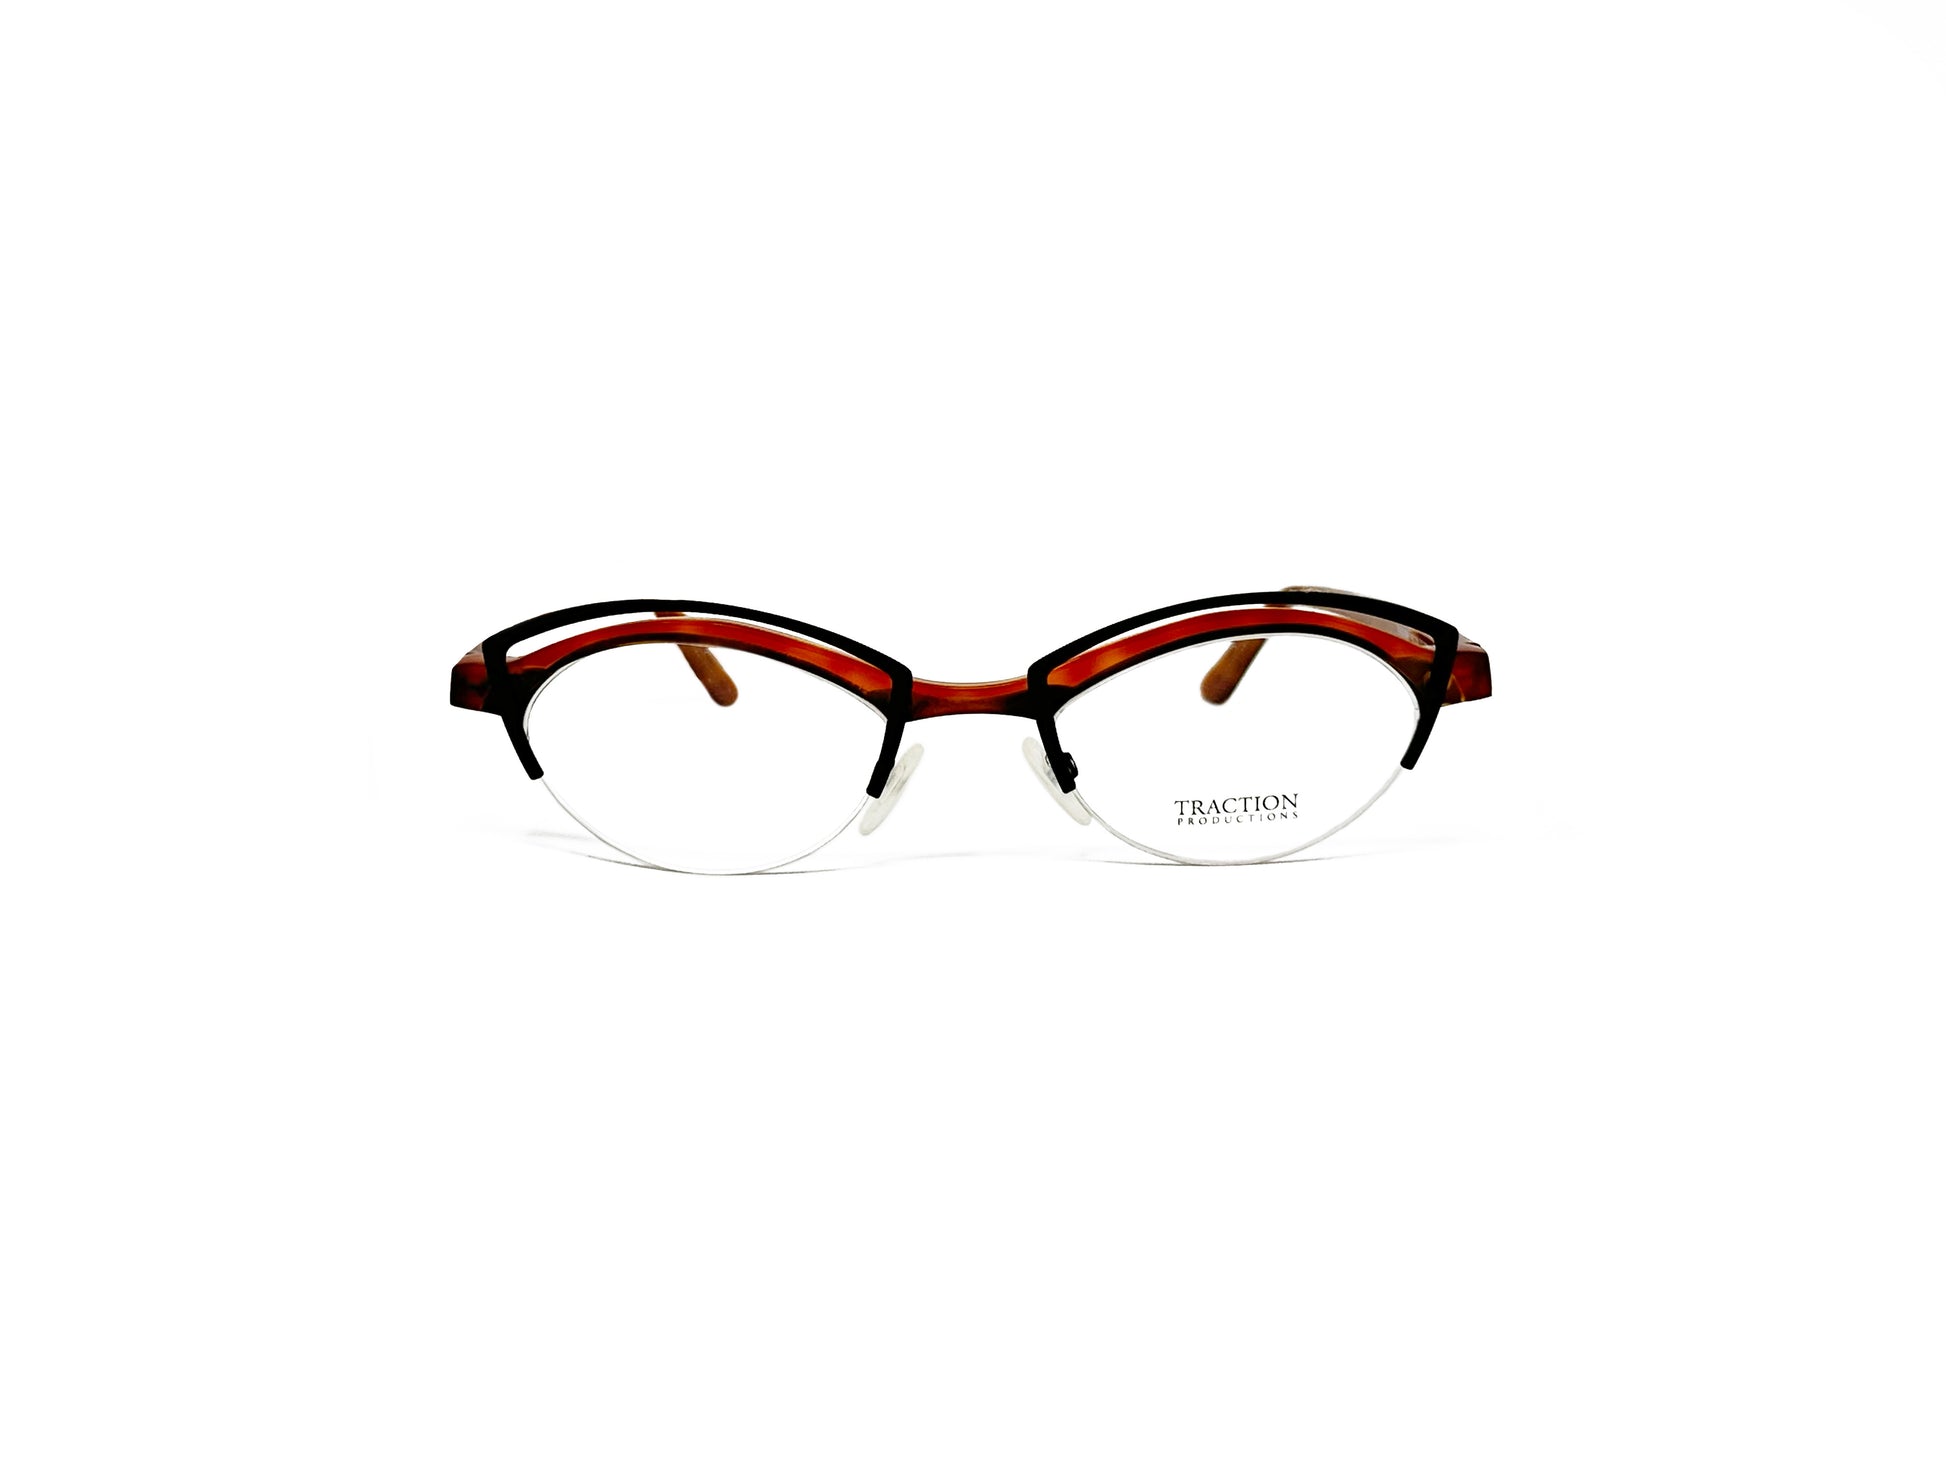 Traction metal, rounded cat-eye optical frame with cutouts at top of frame. Model: Bazaar. Color: Ecacoa - Reddish-orange and black. Front view. 